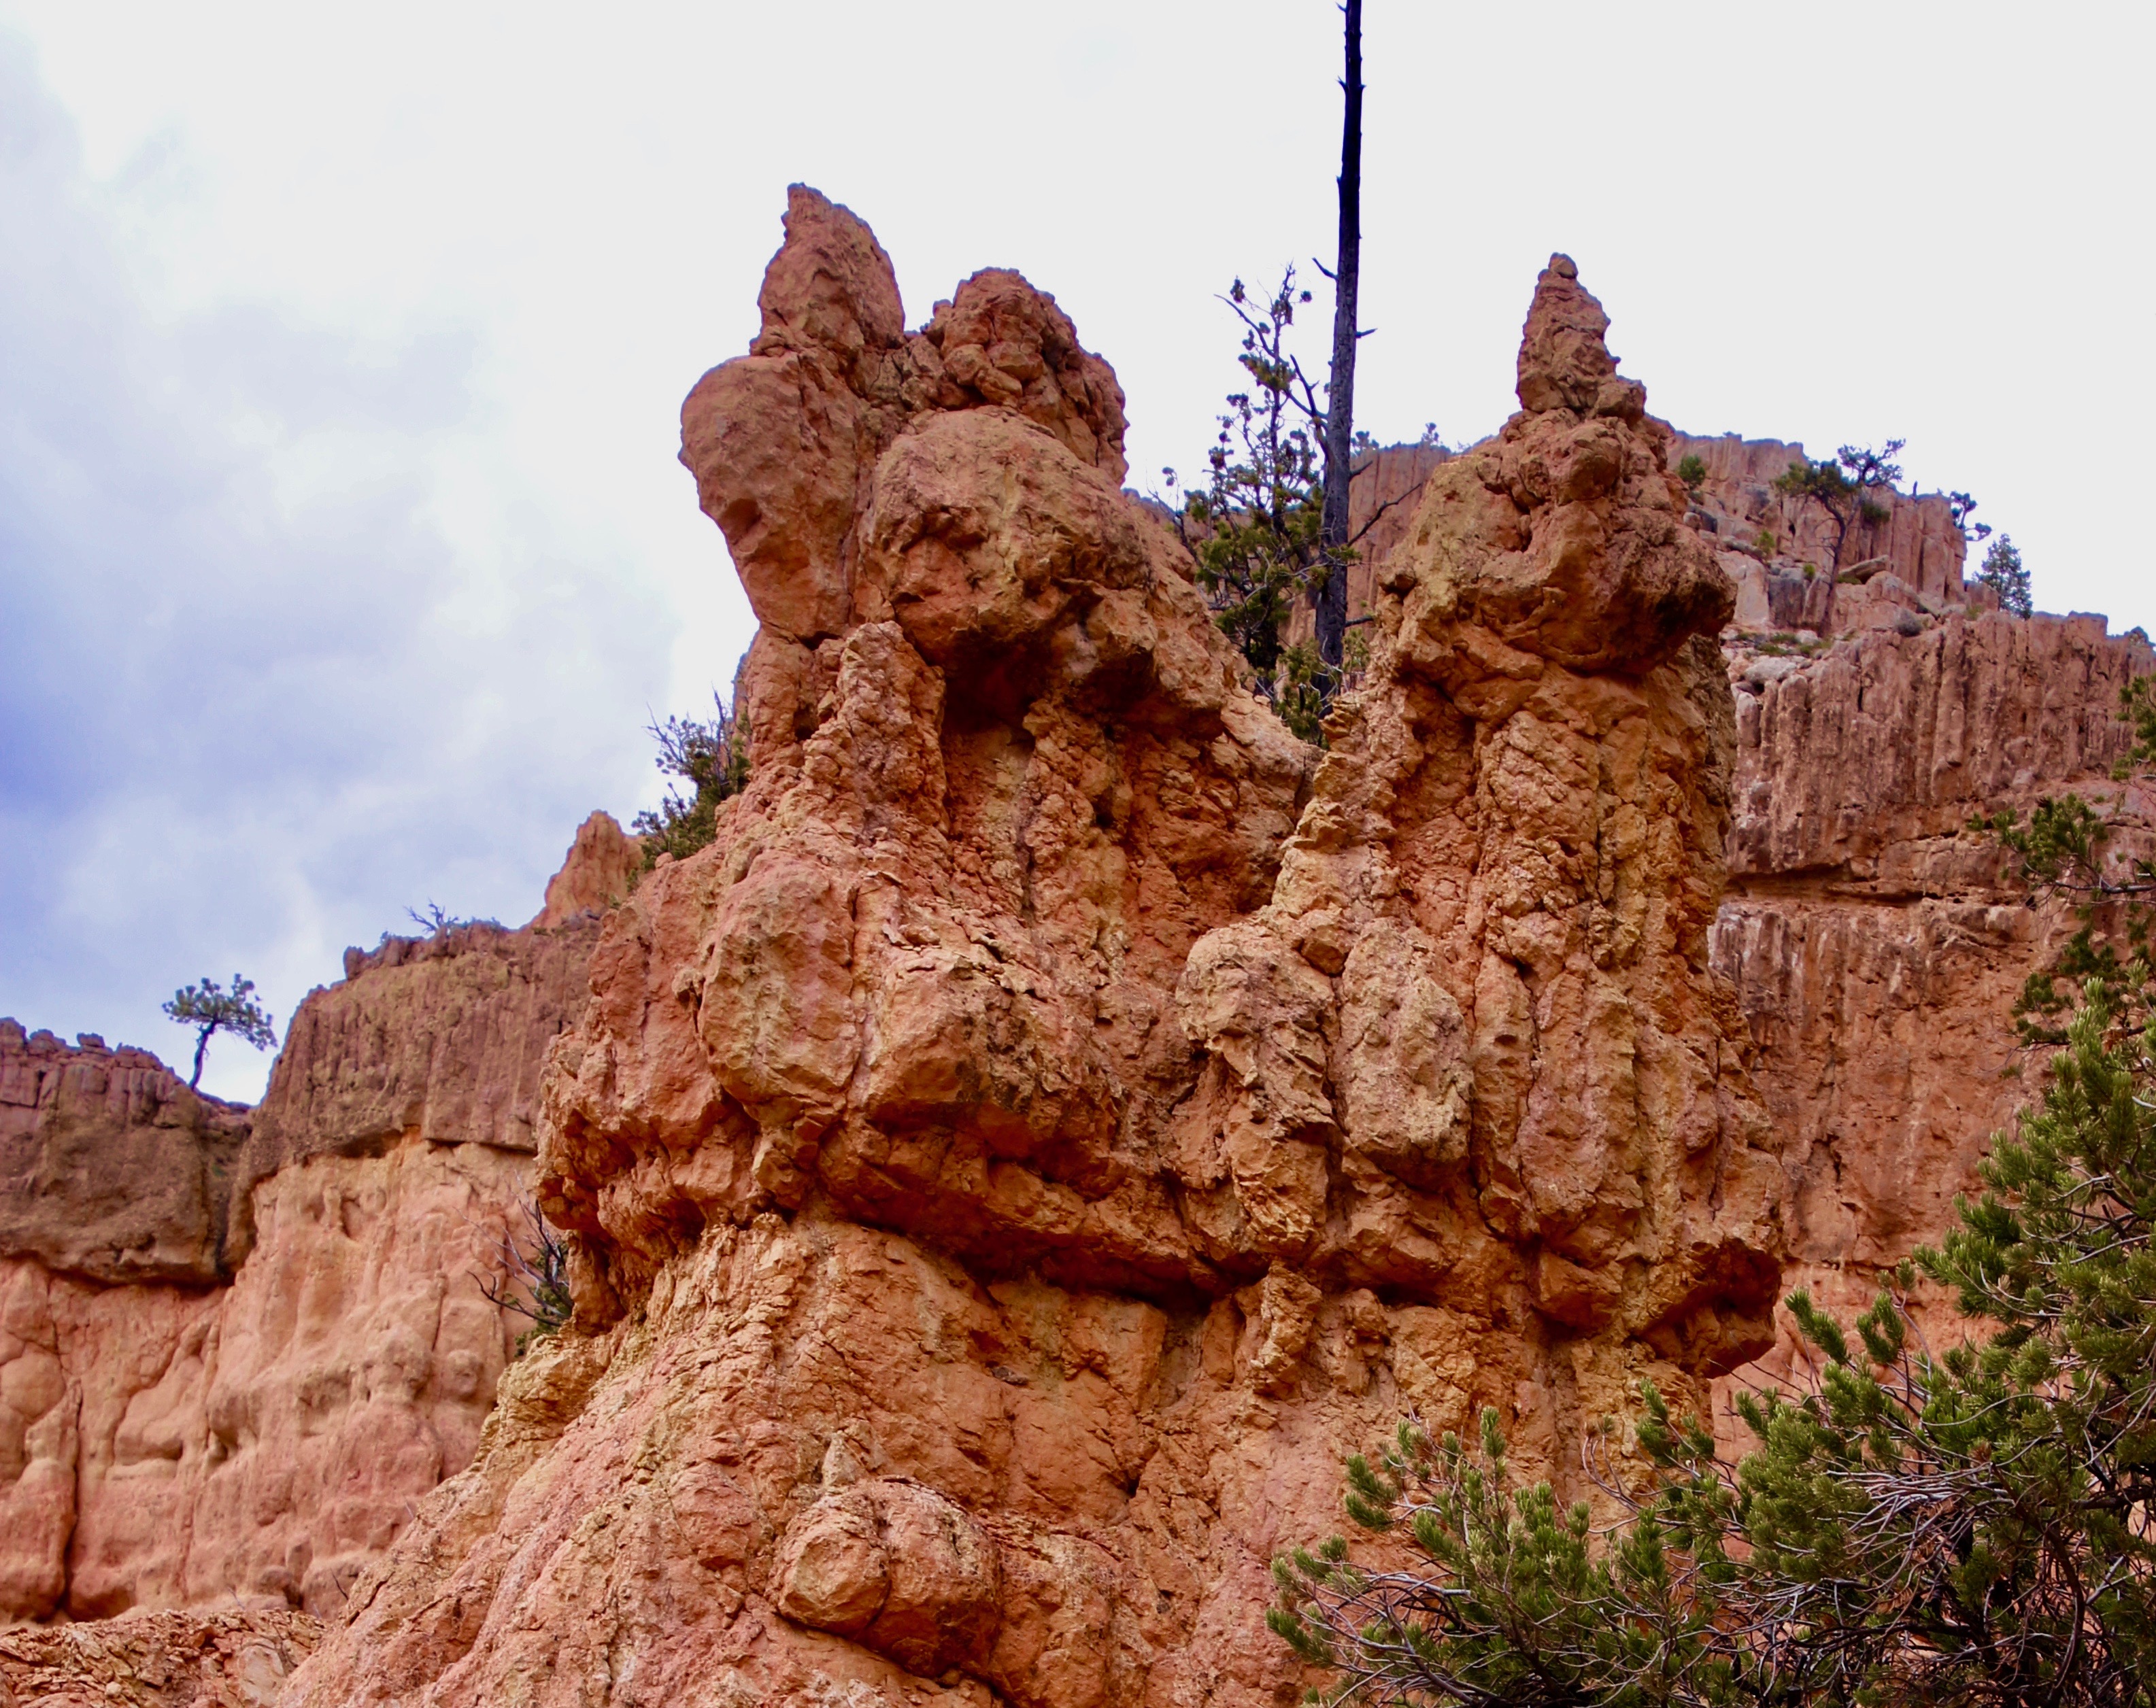 Photo of scary hoodoos in Red Canyon State Park by Peggy Mekemson.